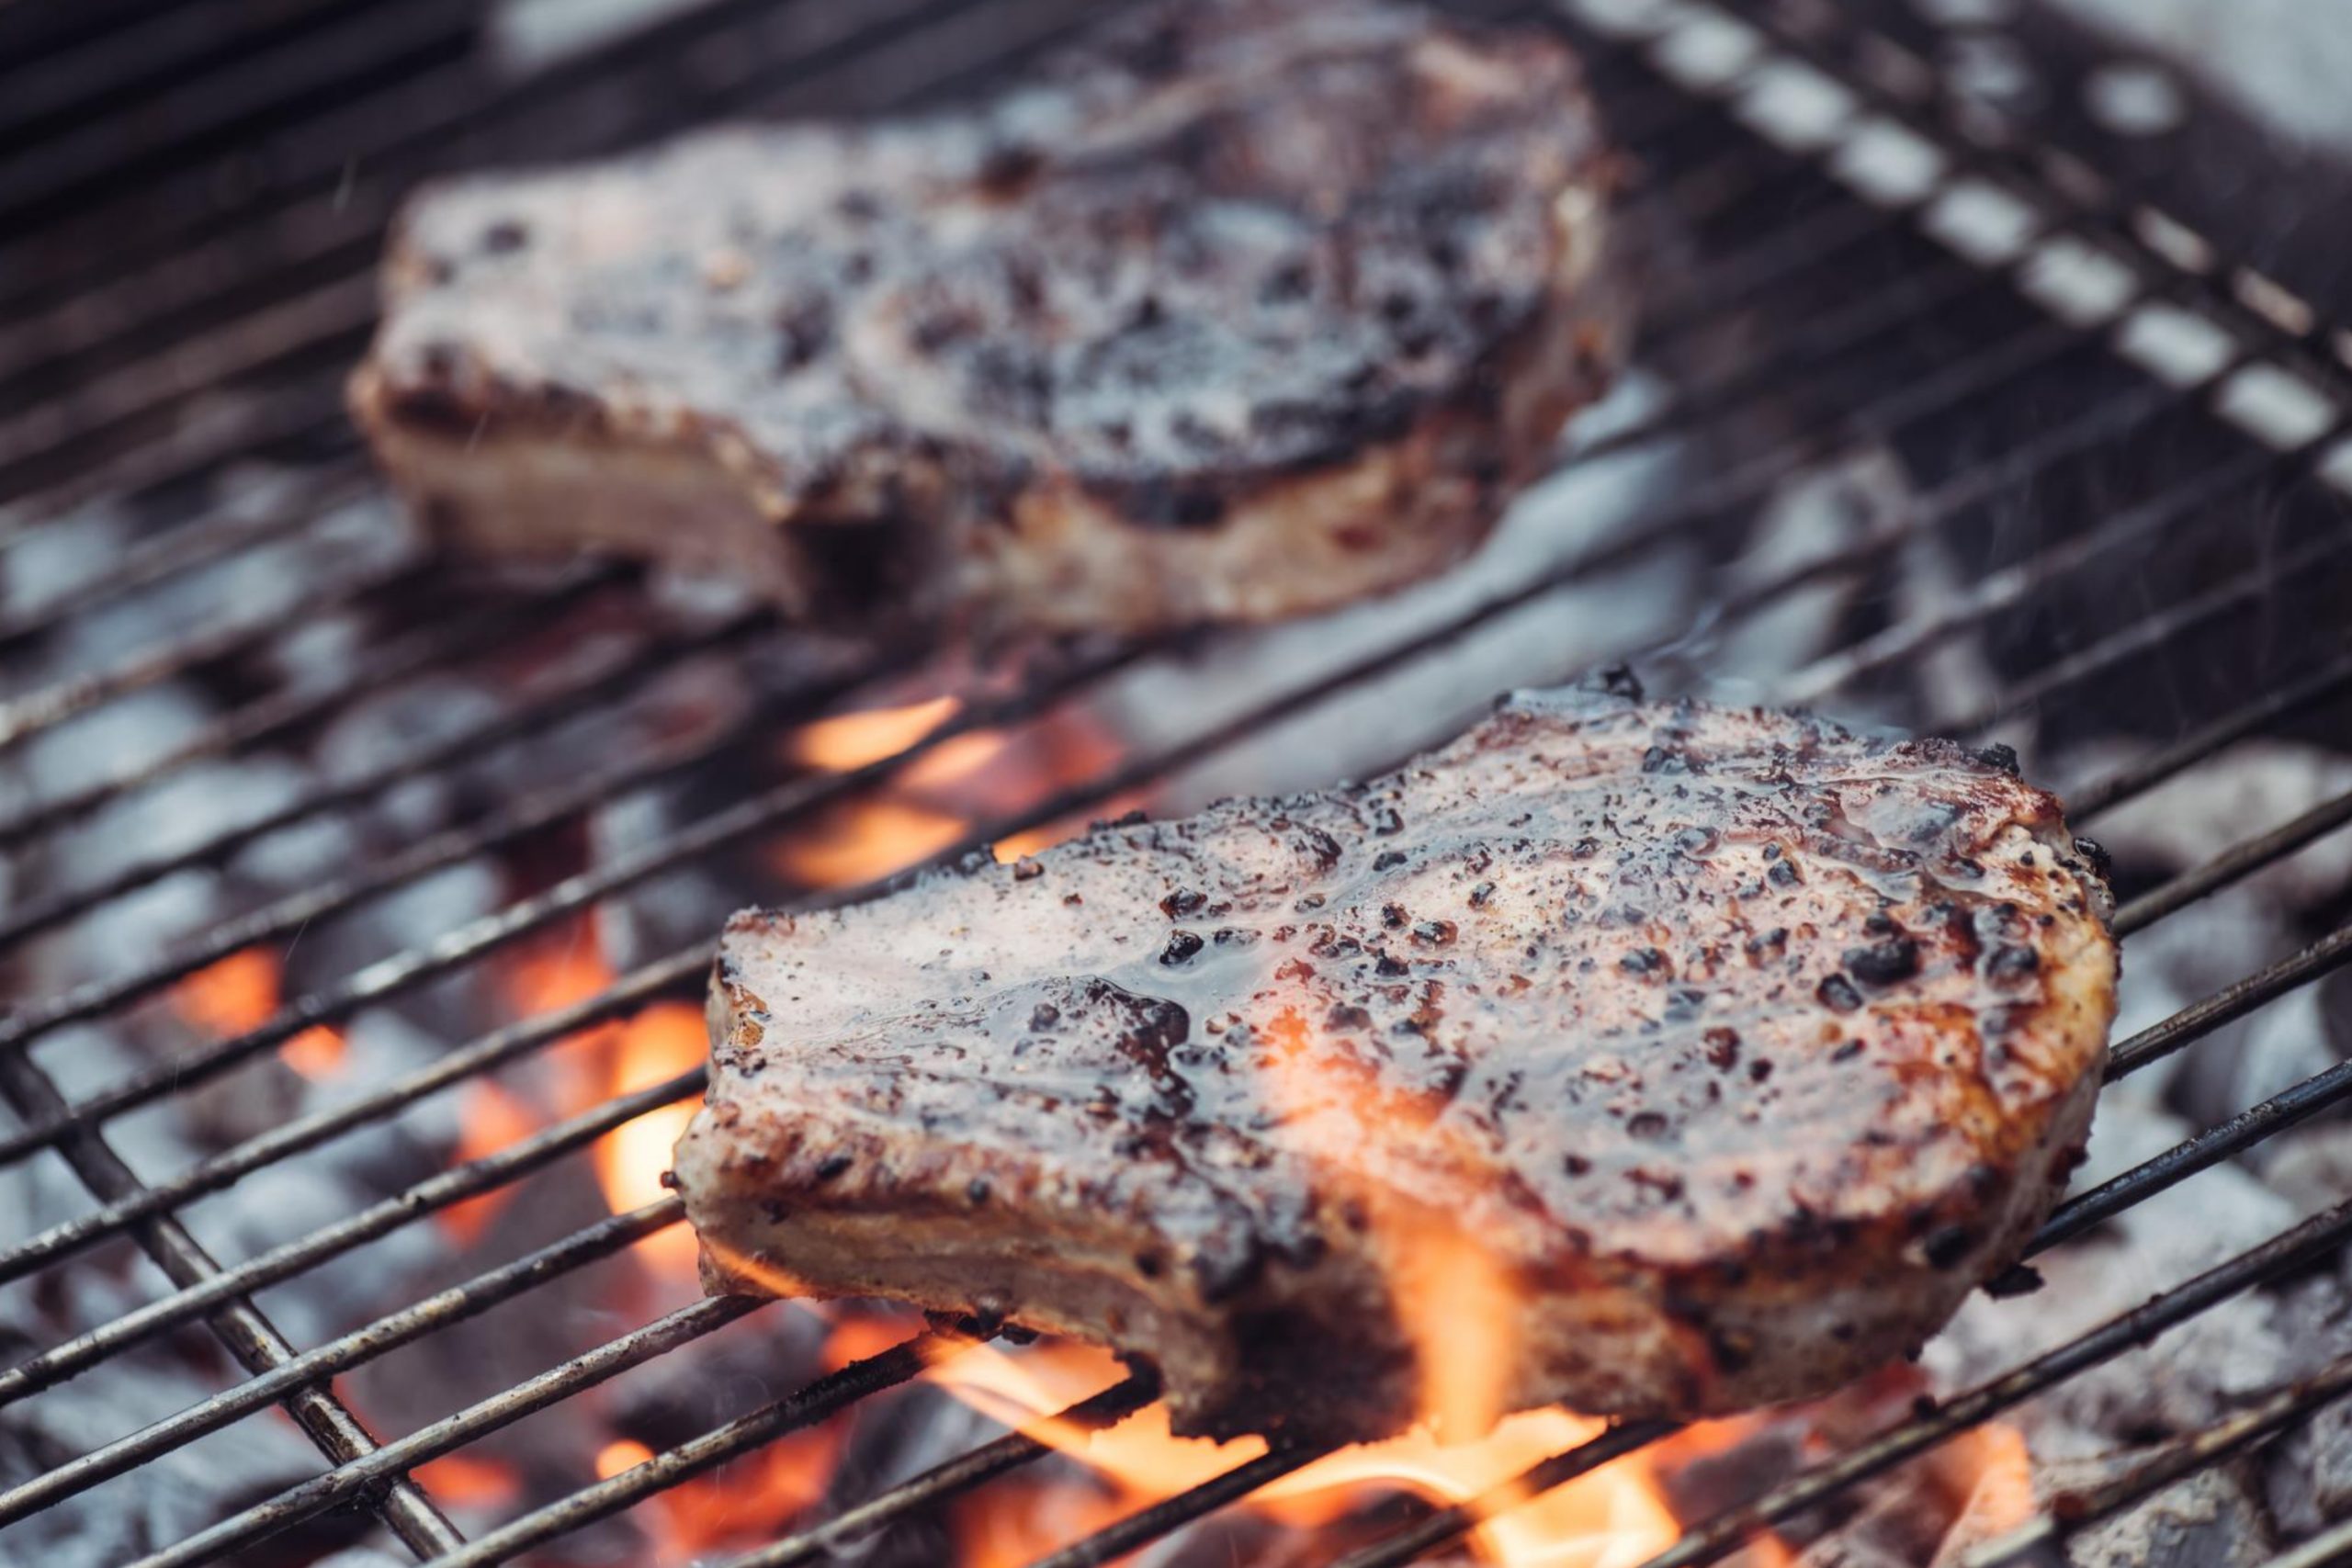 What Preventive Measures to Take When Using a Propane Gas Grill